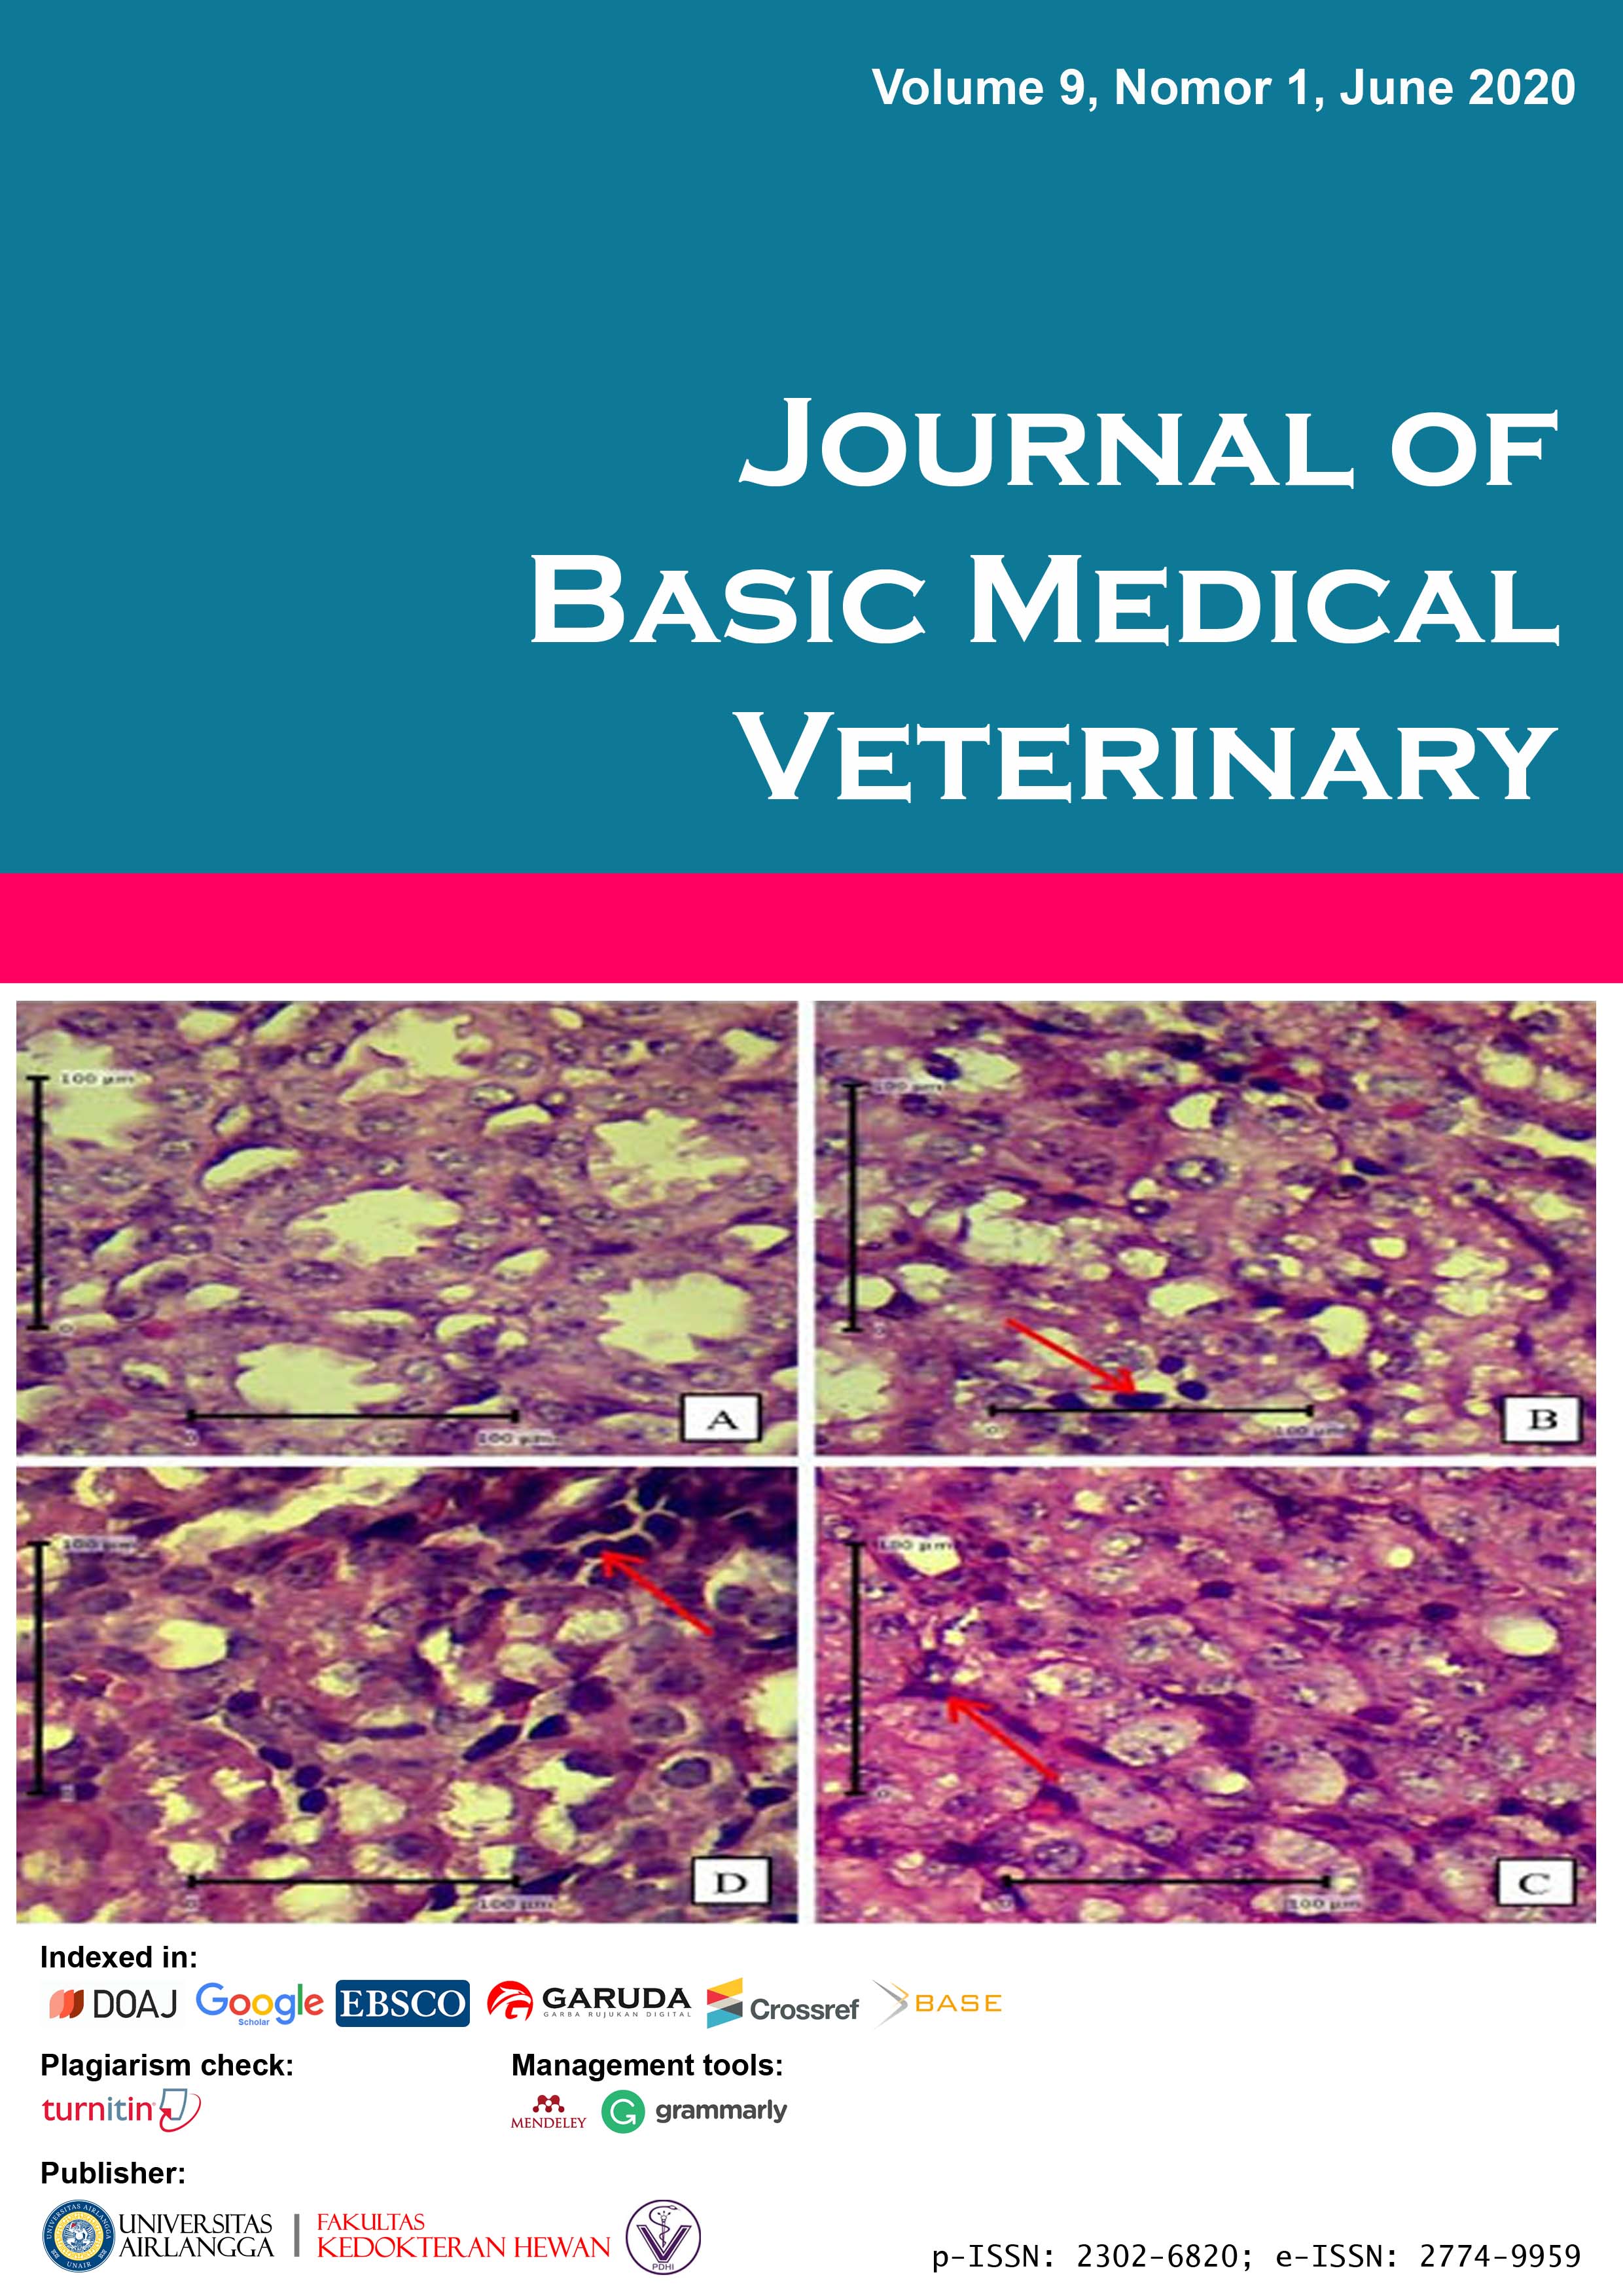 								View Vol. 9 No. 1 (2020): Journal of Basic Medical Veterinary, June 2020
							